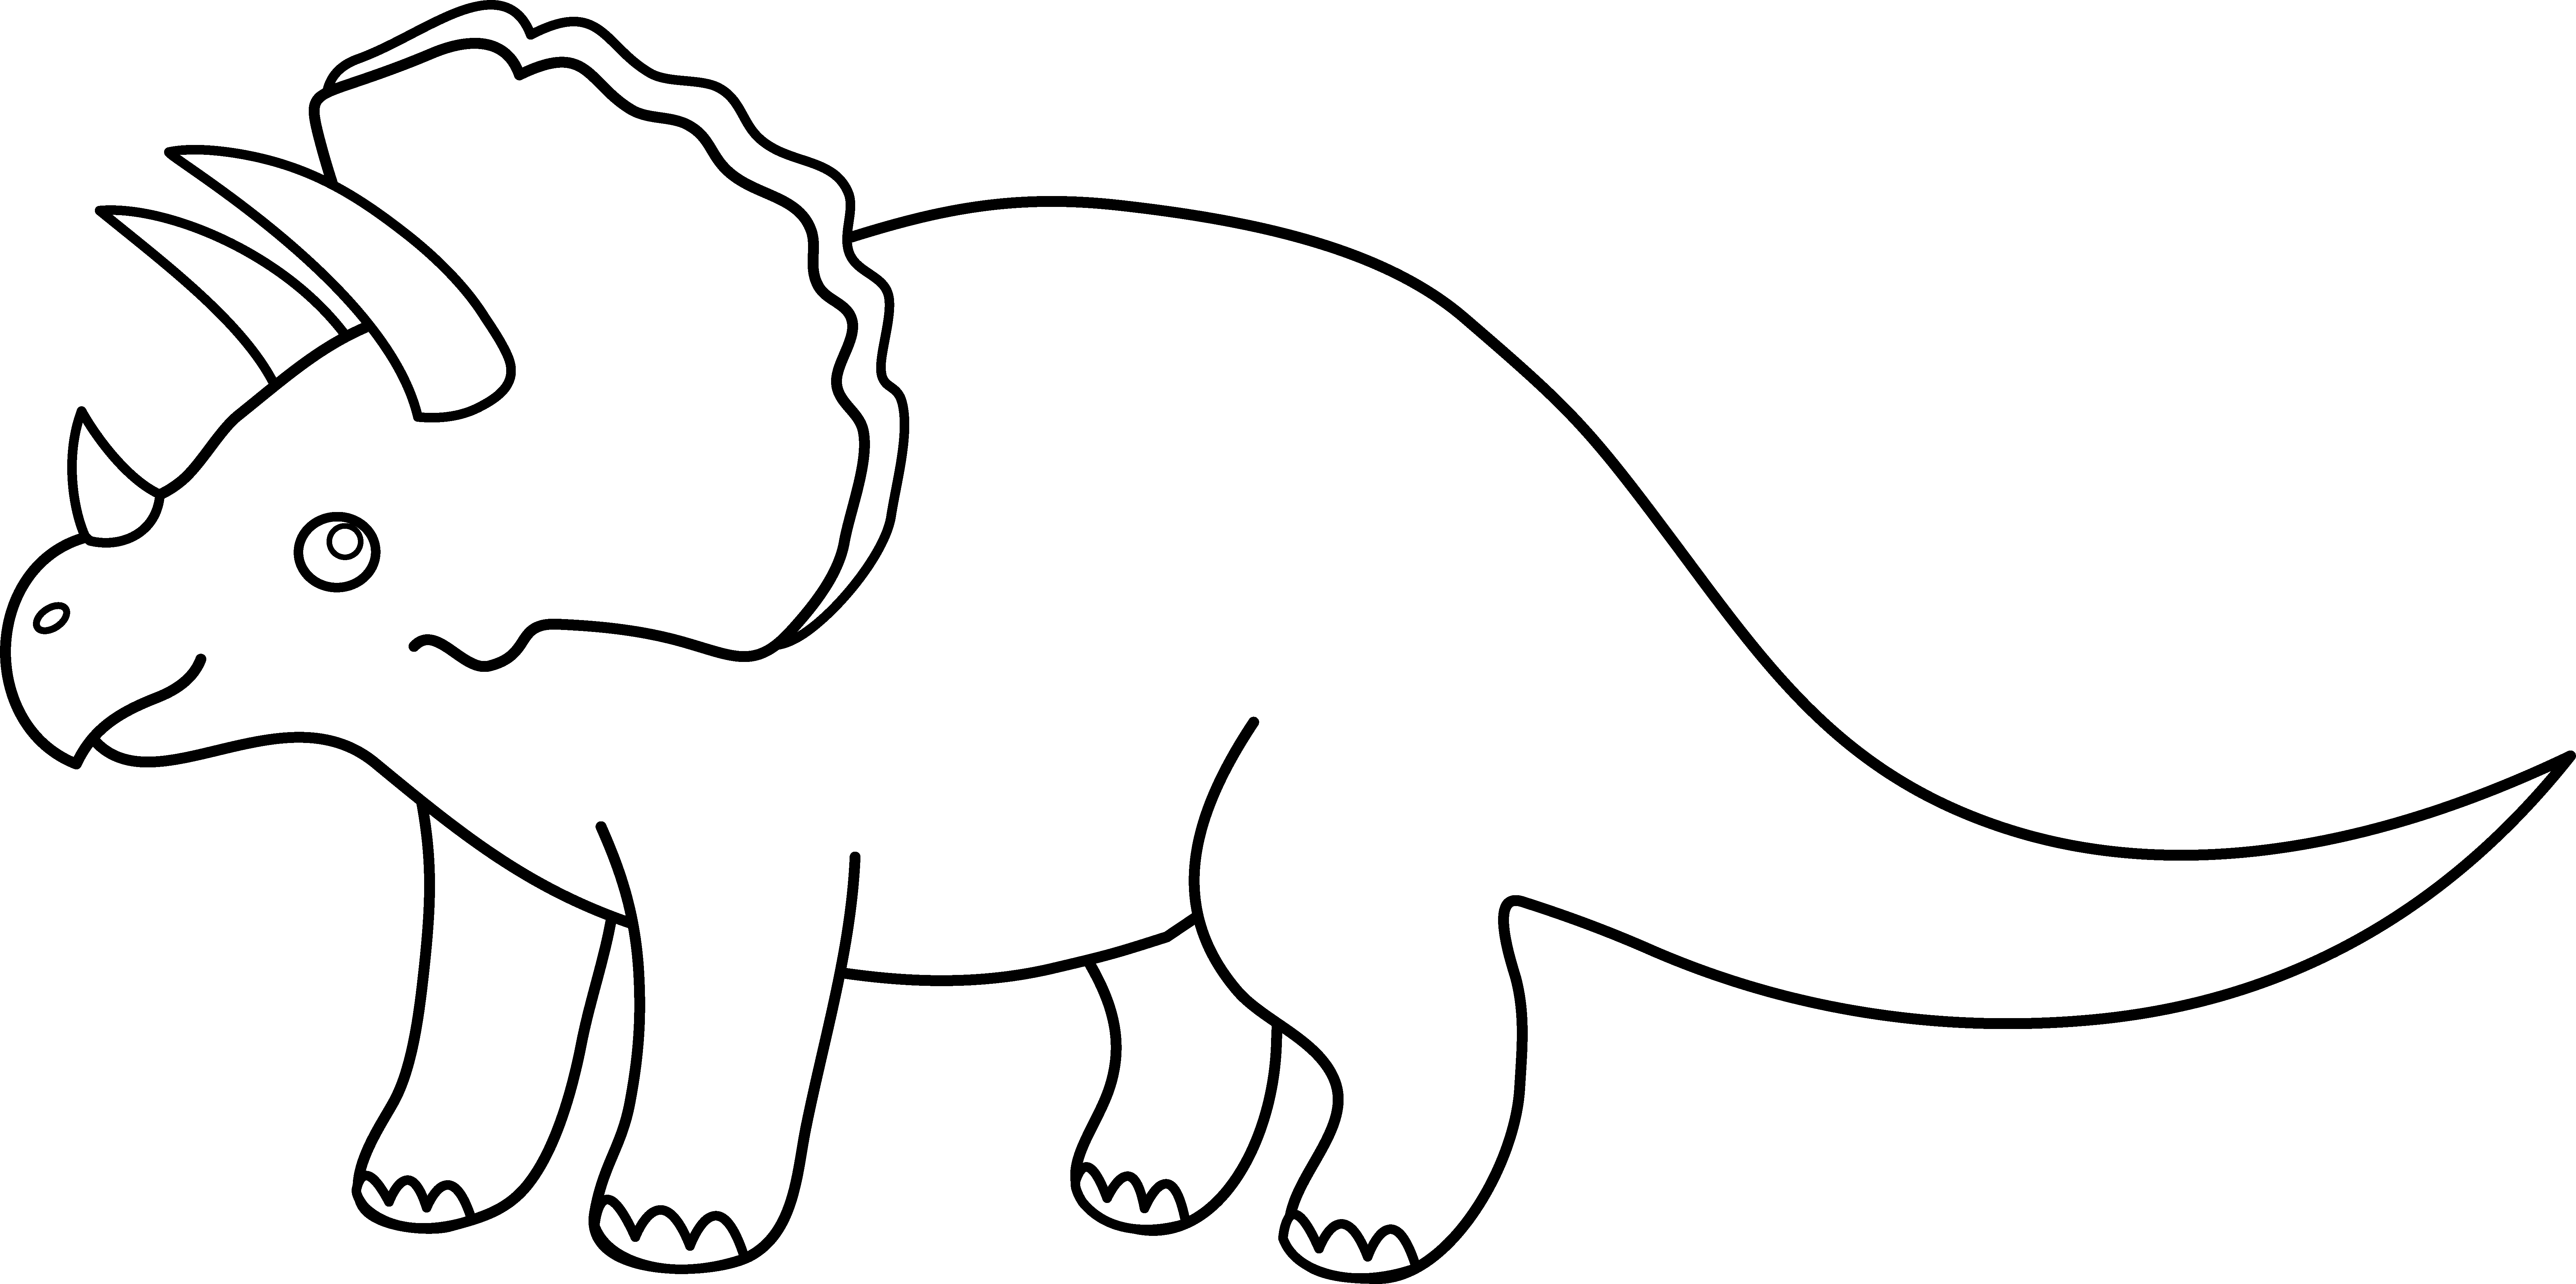 Triceratops Outline Images  Pictures - Becuo